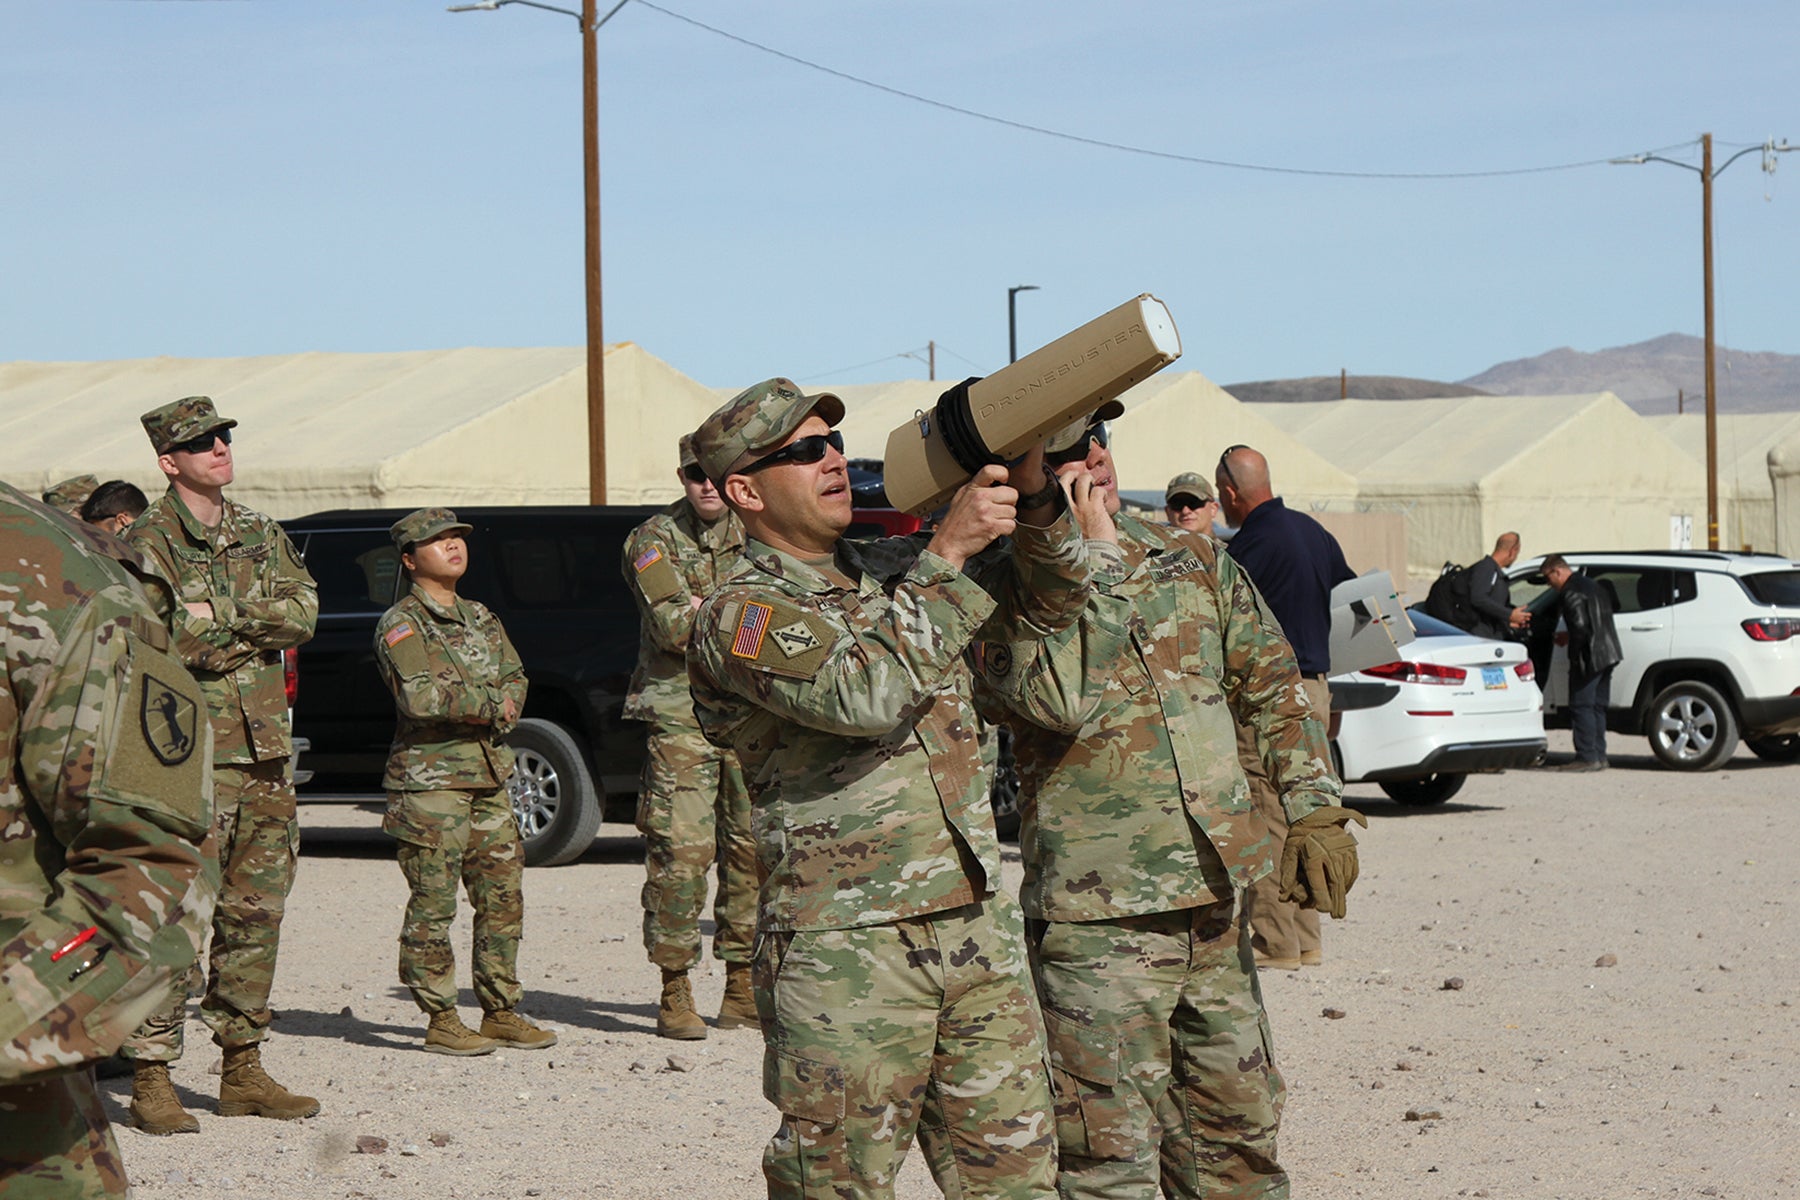 A soldier demonstrates a Dronebuster counter-unmanned aircraft system at Fort Irwin, California. (Credit: U.S. Army/Pfc. Gower Liu)